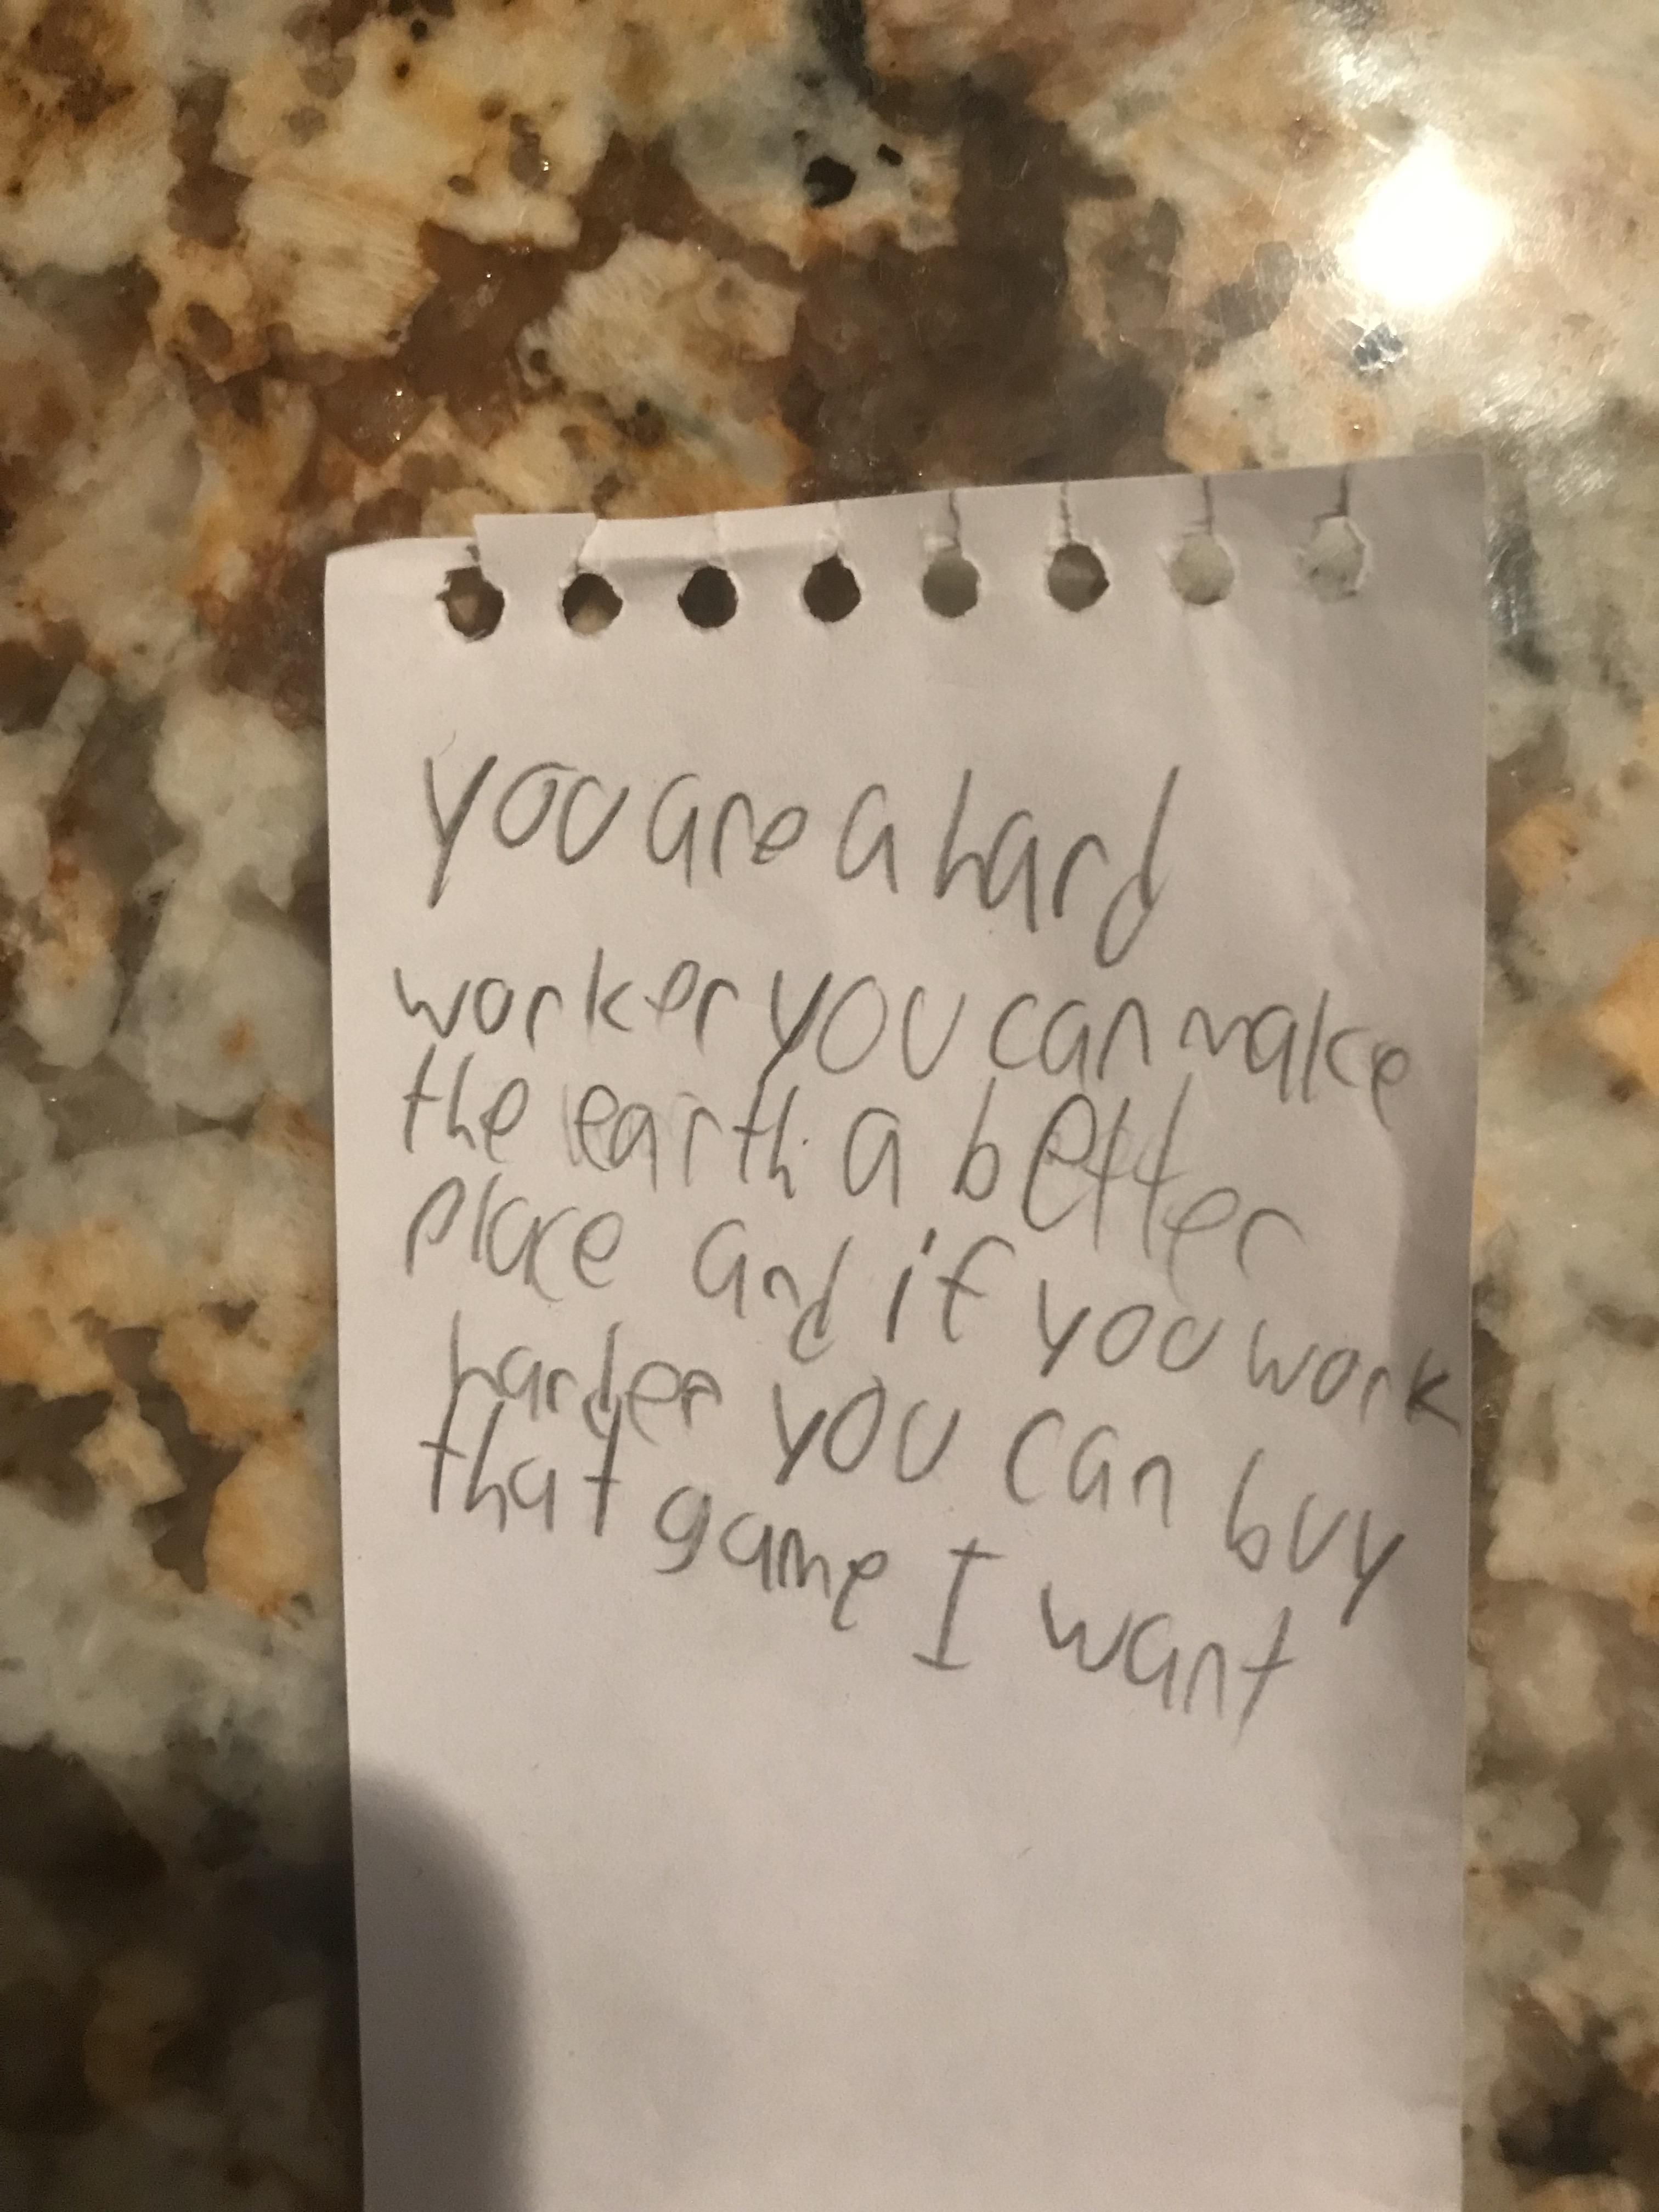 A note that my little cousin left for his dad.